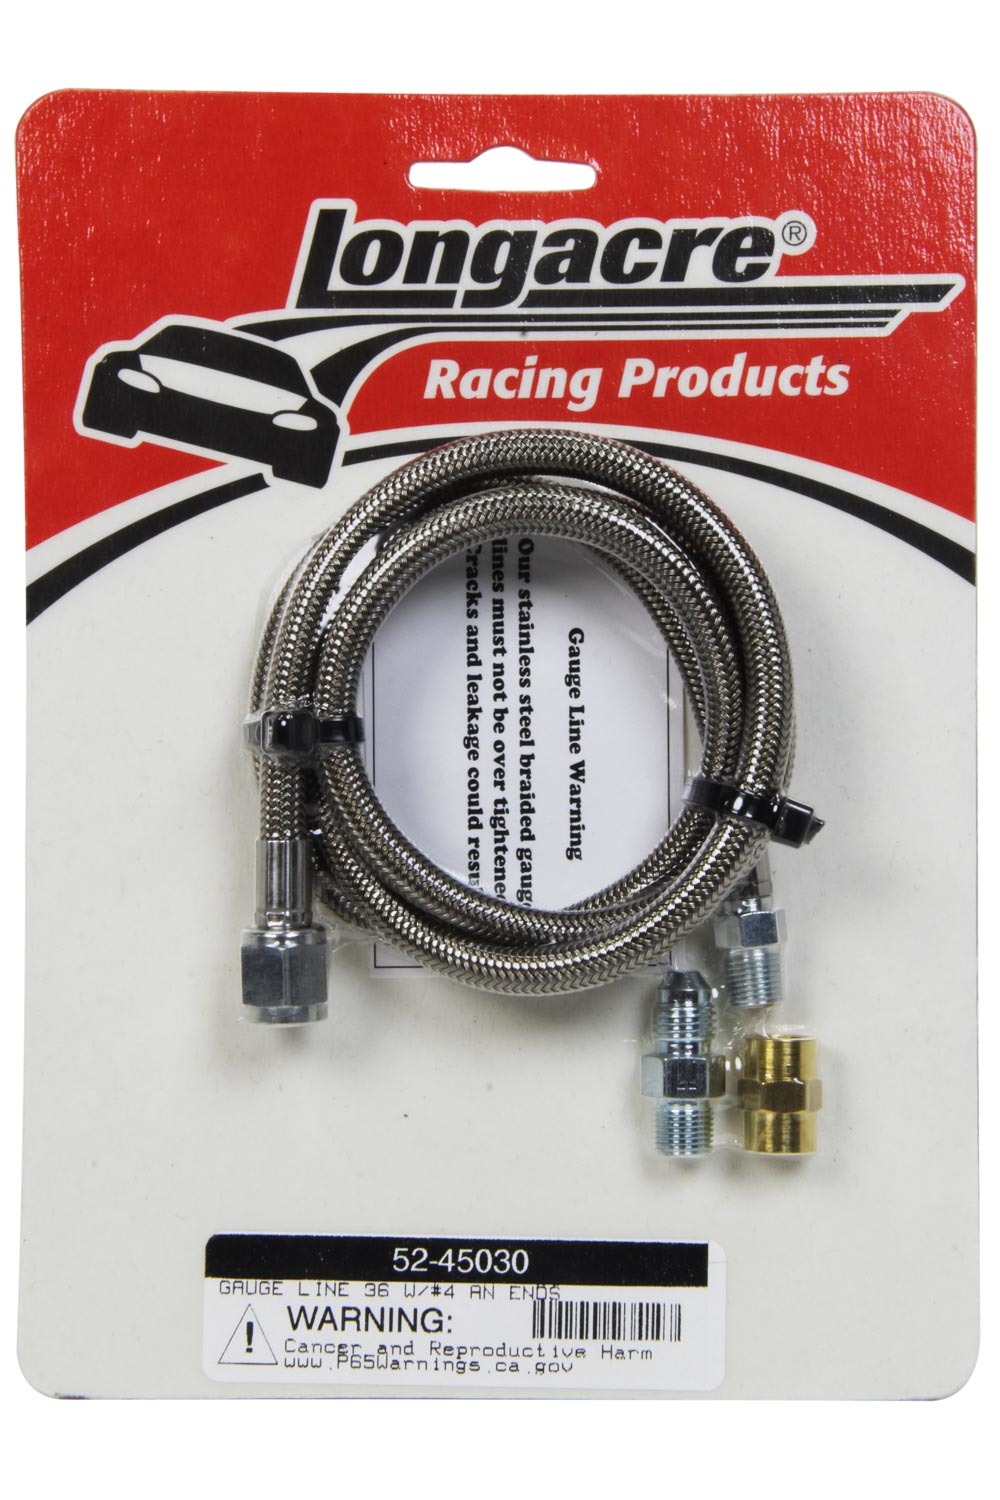 Longacre 52-45030 - Gauge Line Kit, 4 AN, 36 in Long, 4 AN Female to 1/8 in NPT Male, Fittings Included, PTFE, Braided Stainless, Mechanical Pressure Gauges, Kit